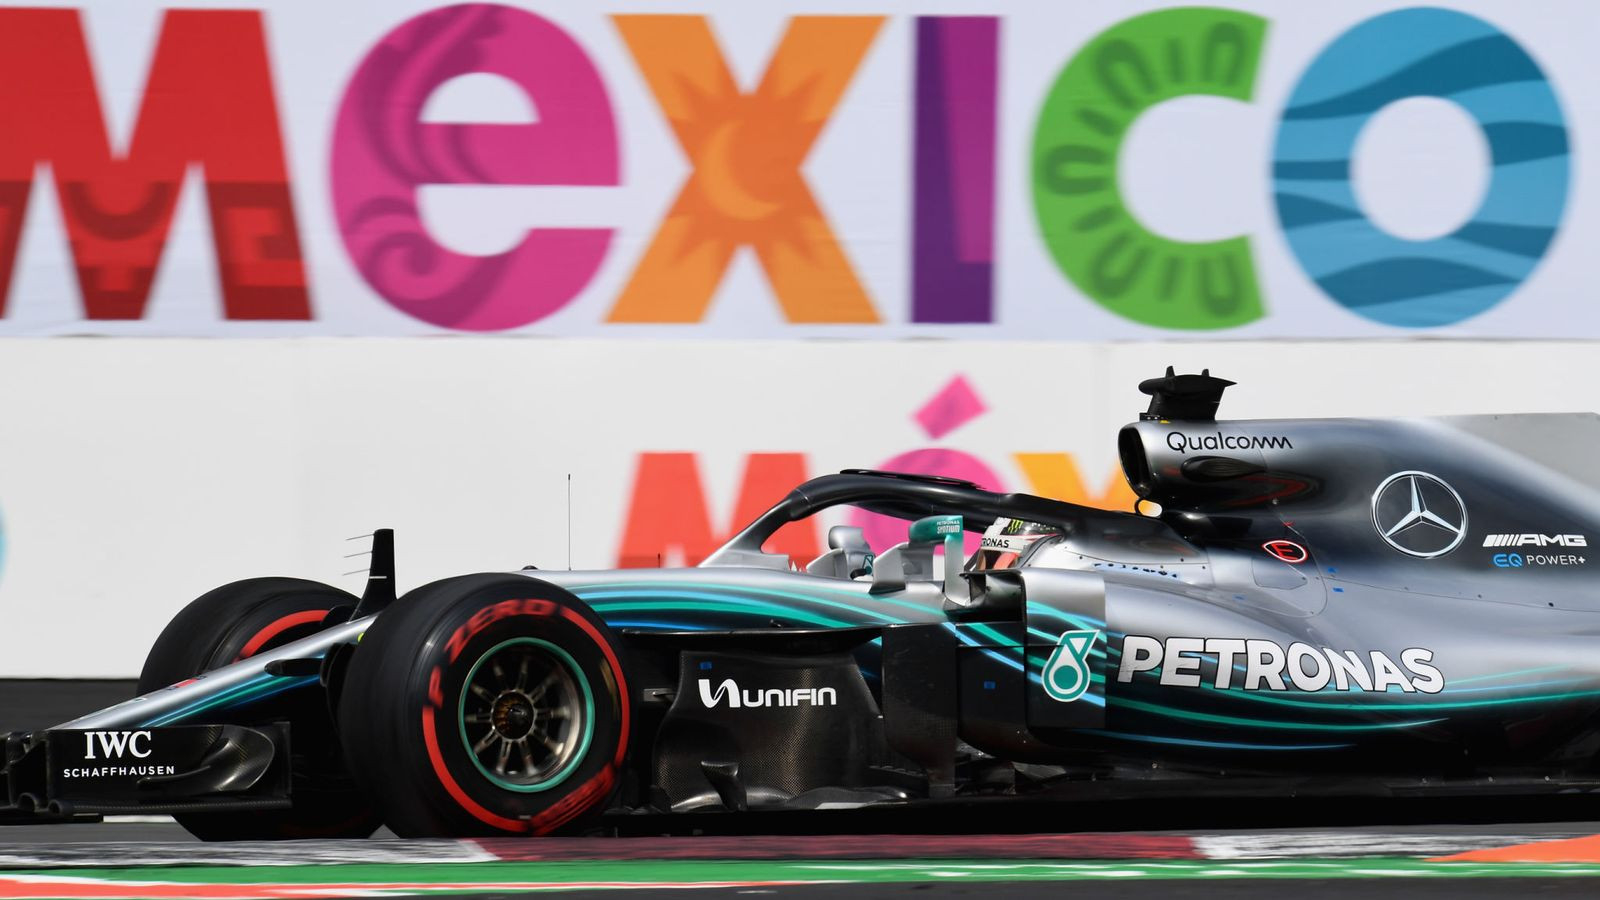 Mexican Gp Staying On F1 Calendar In New Deal Until 2022 - Sports Love Me-When Will F1 2022 Calendar Be Confirmed